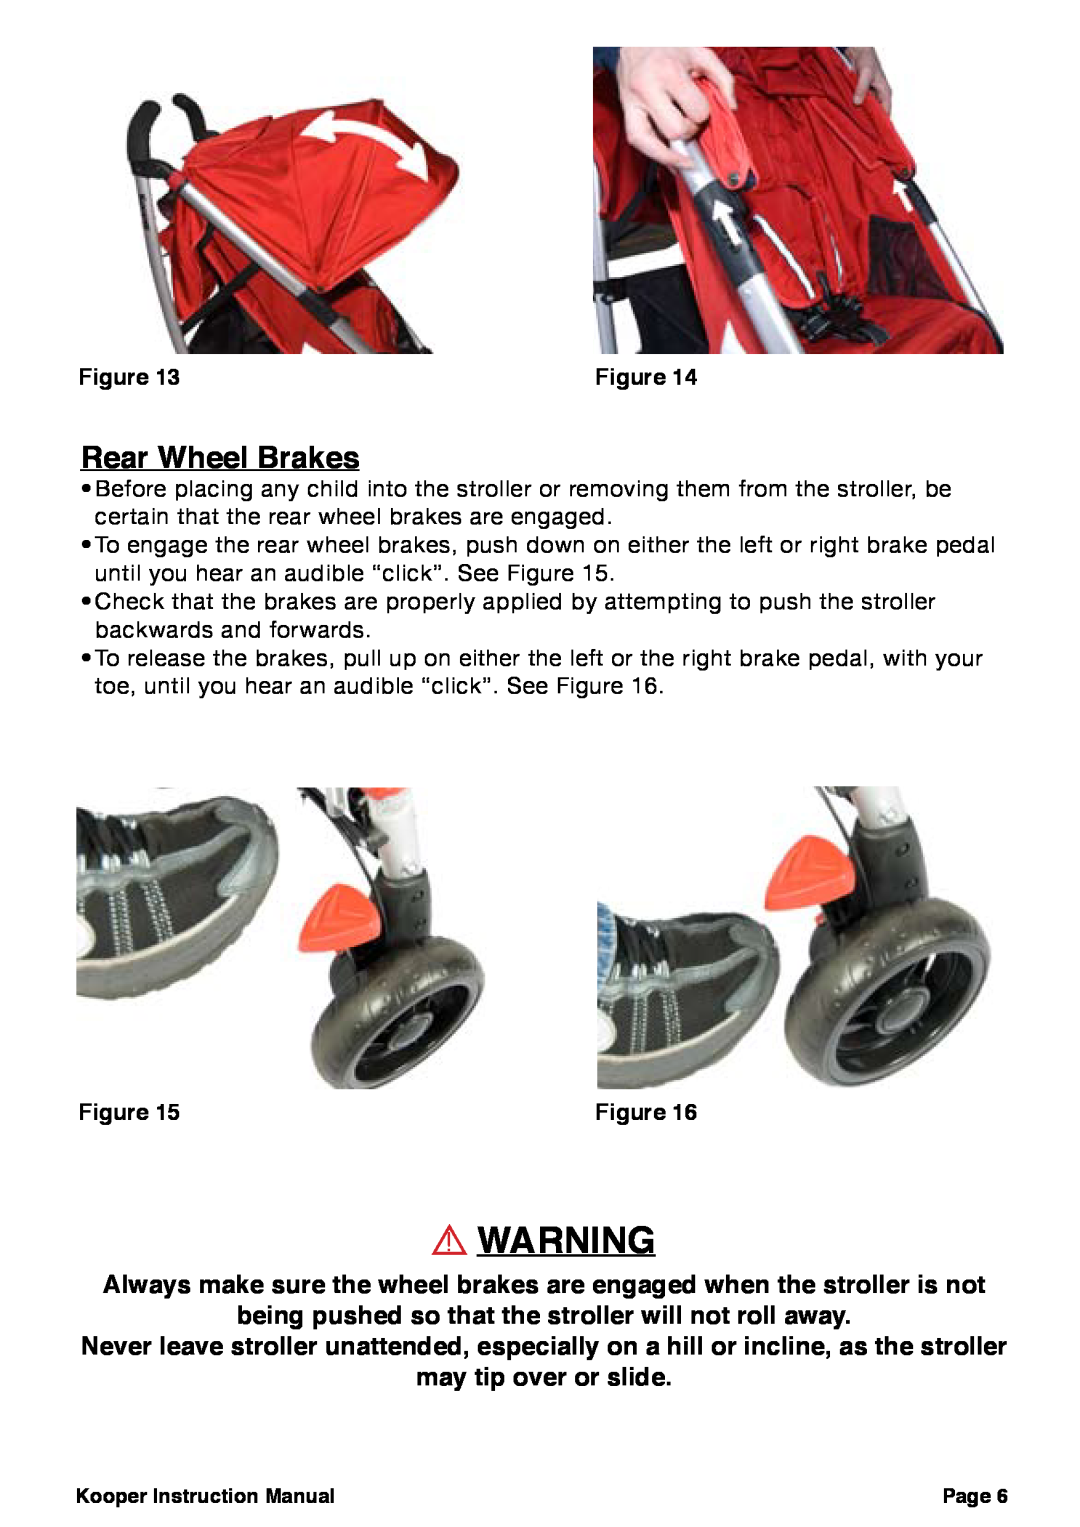 Joovy 30X Series manual Rear Wheel Brakes, being pushed so that the stroller will not roll away, may tip over or slide 